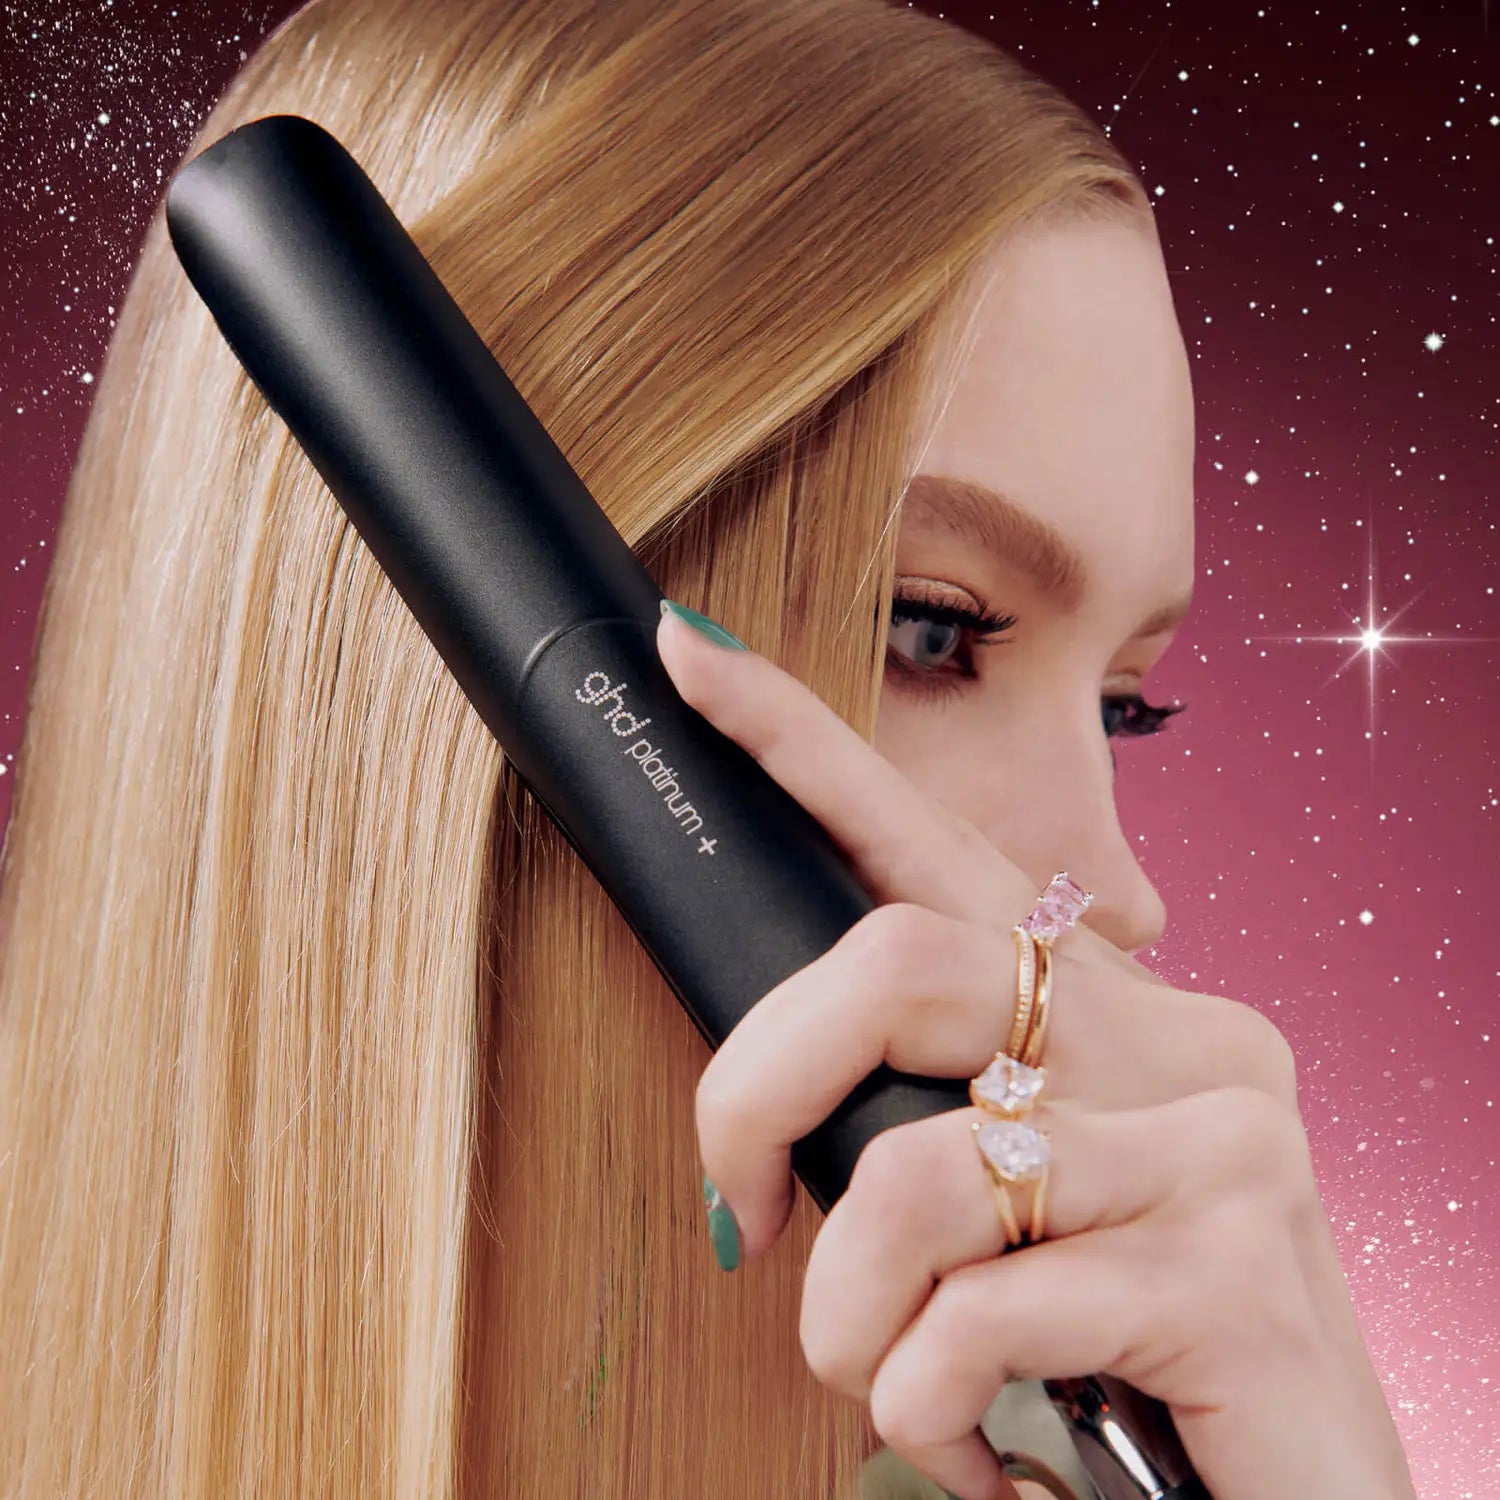 Model styling hair with ghd Platinum+ Festive Gift Set